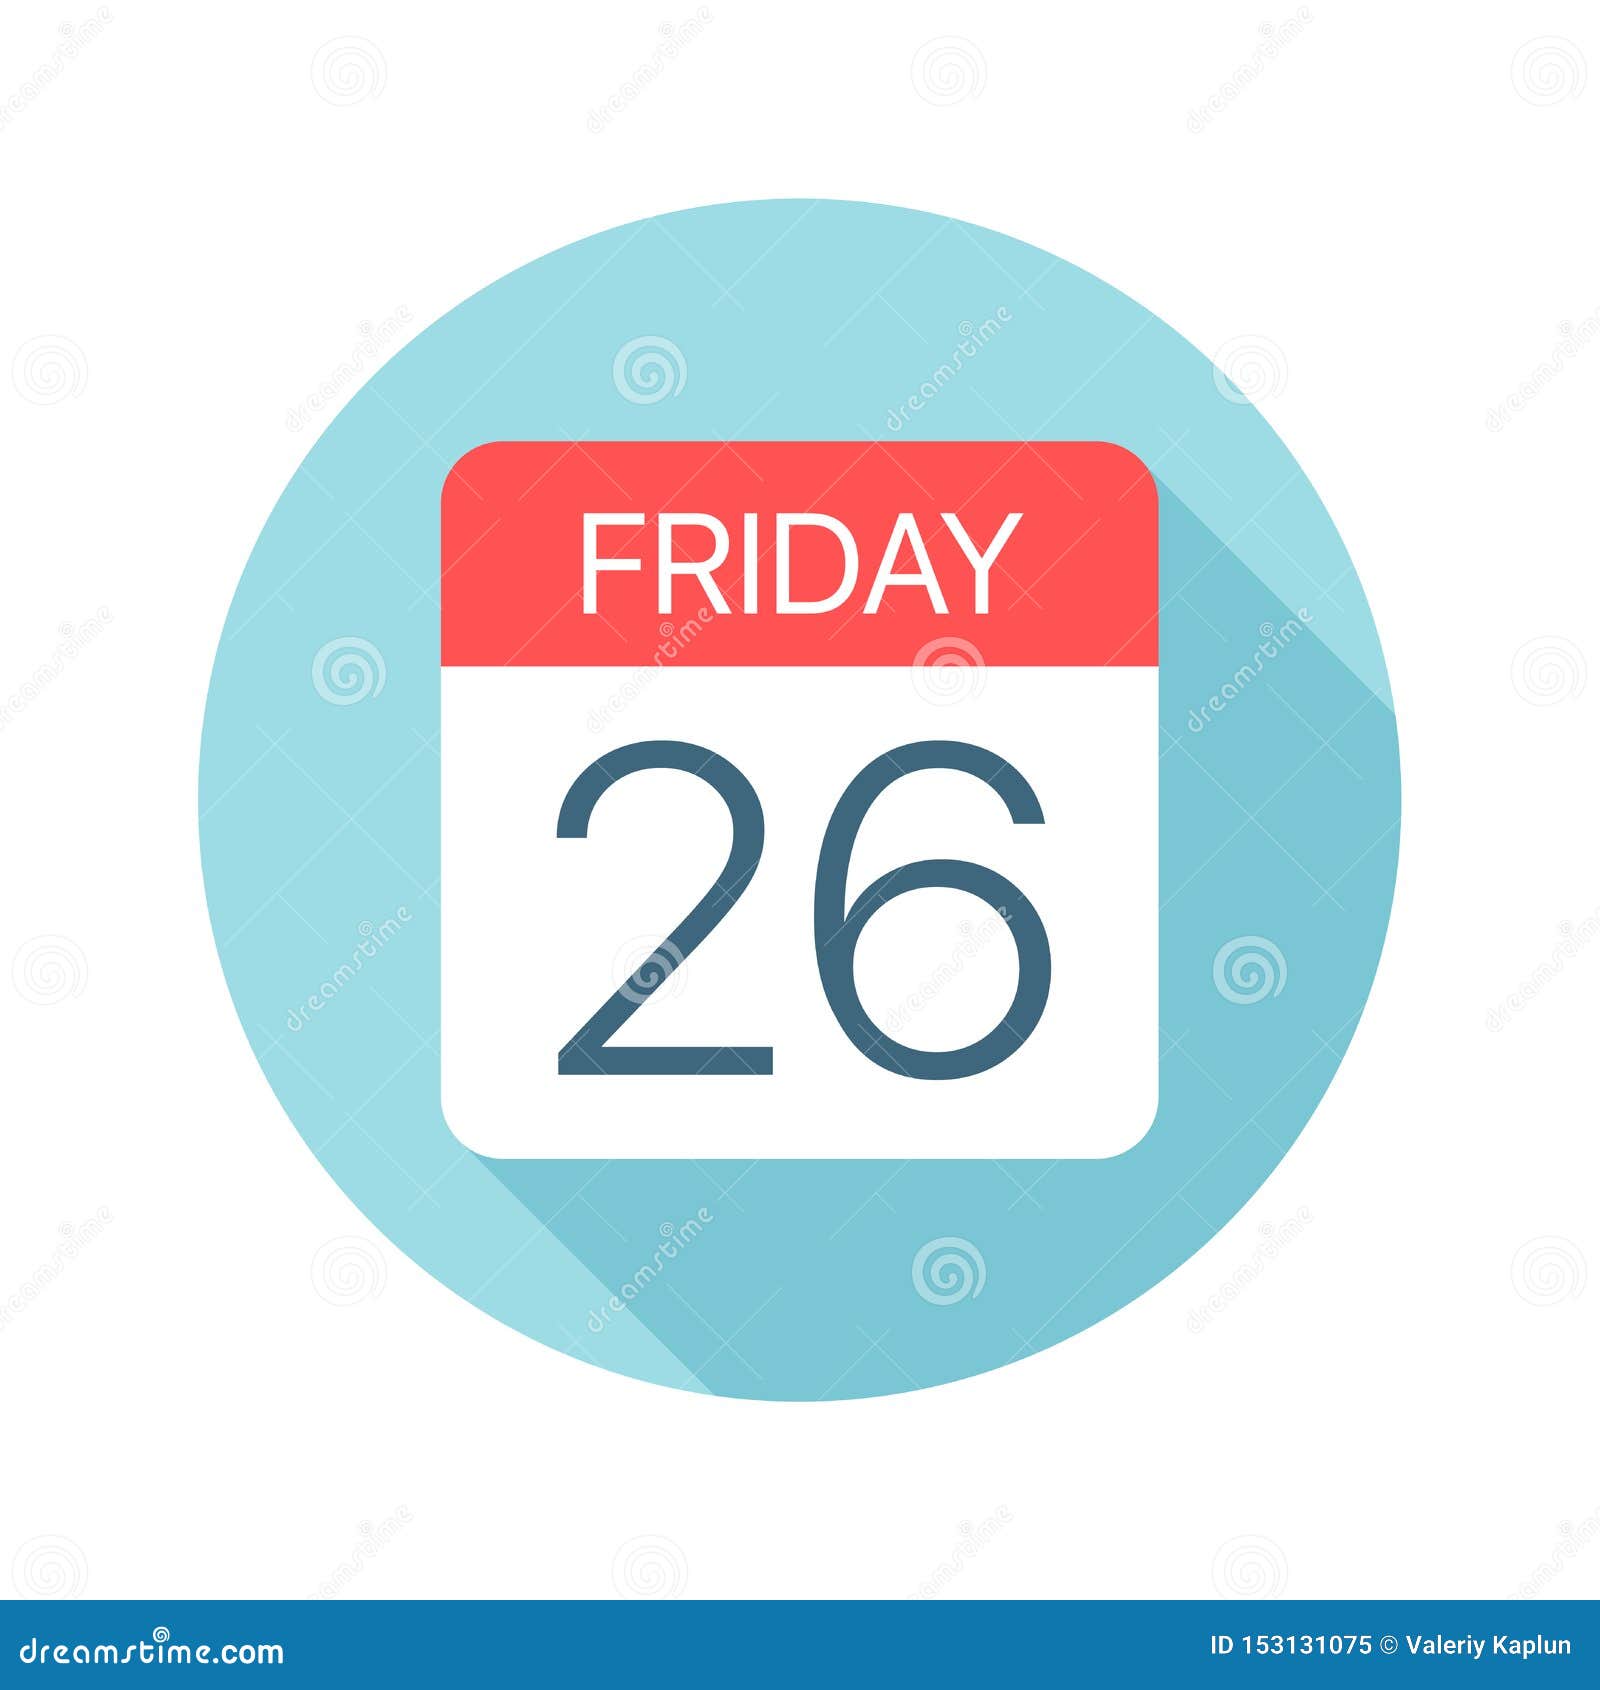 Friday 26 Calendar Icon. Vector Illustration of One Day of Week Stock